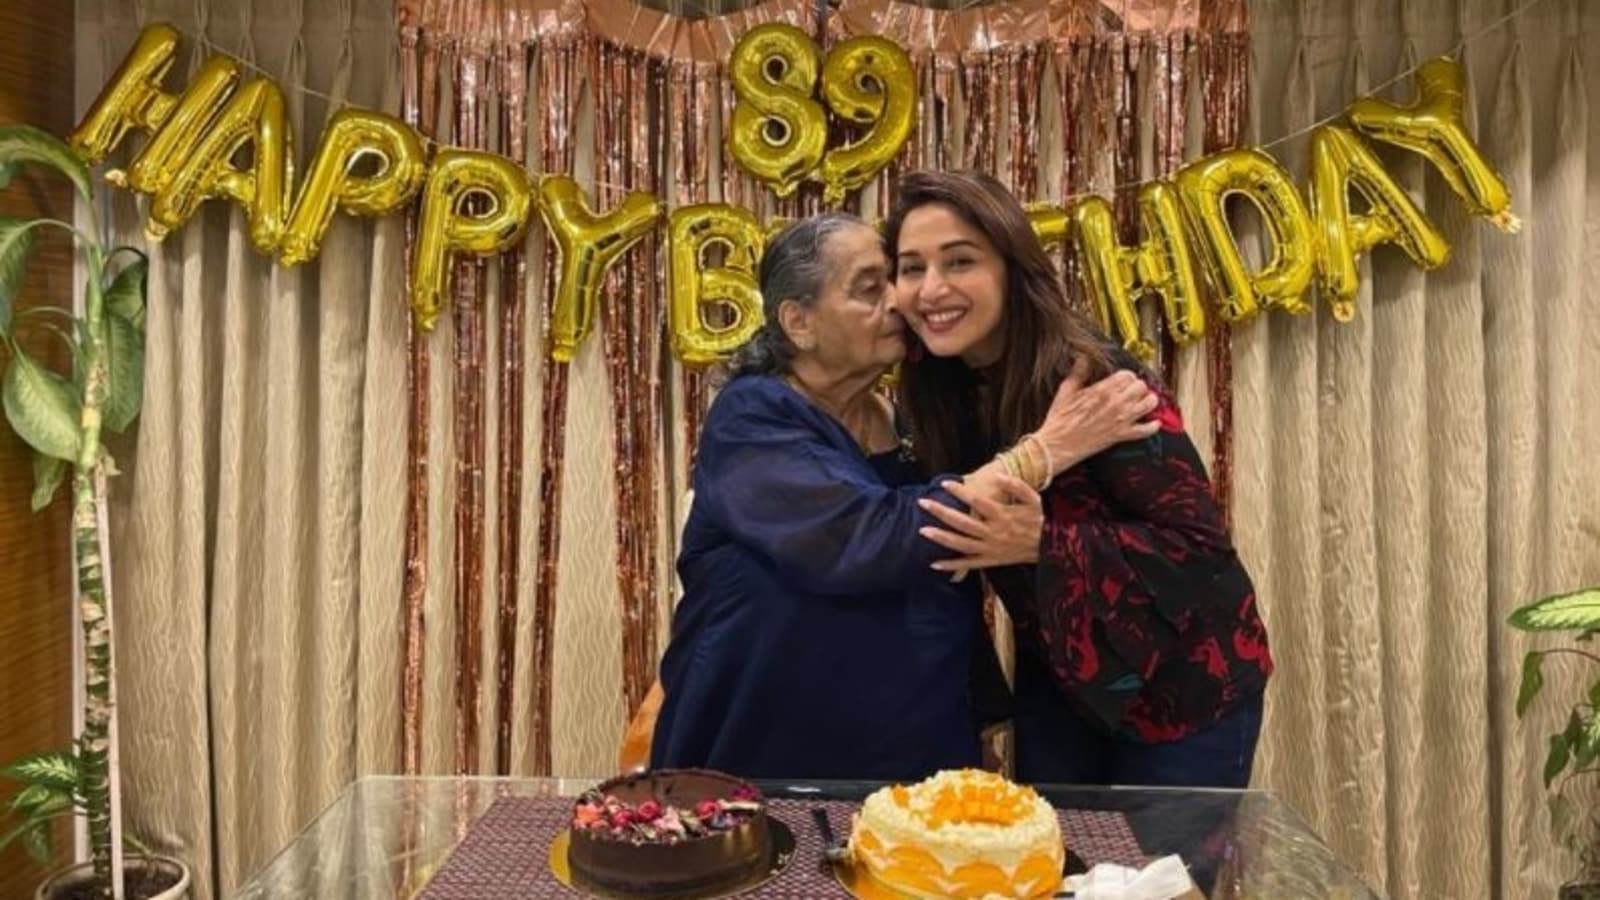 Madhuri Dixit Sexy Nangi Scene - Madhuri Dixit wishes mother on her 89th birthday: 'My strength through all  the ups and downs'. Watch | Bollywood - Hindustan Times